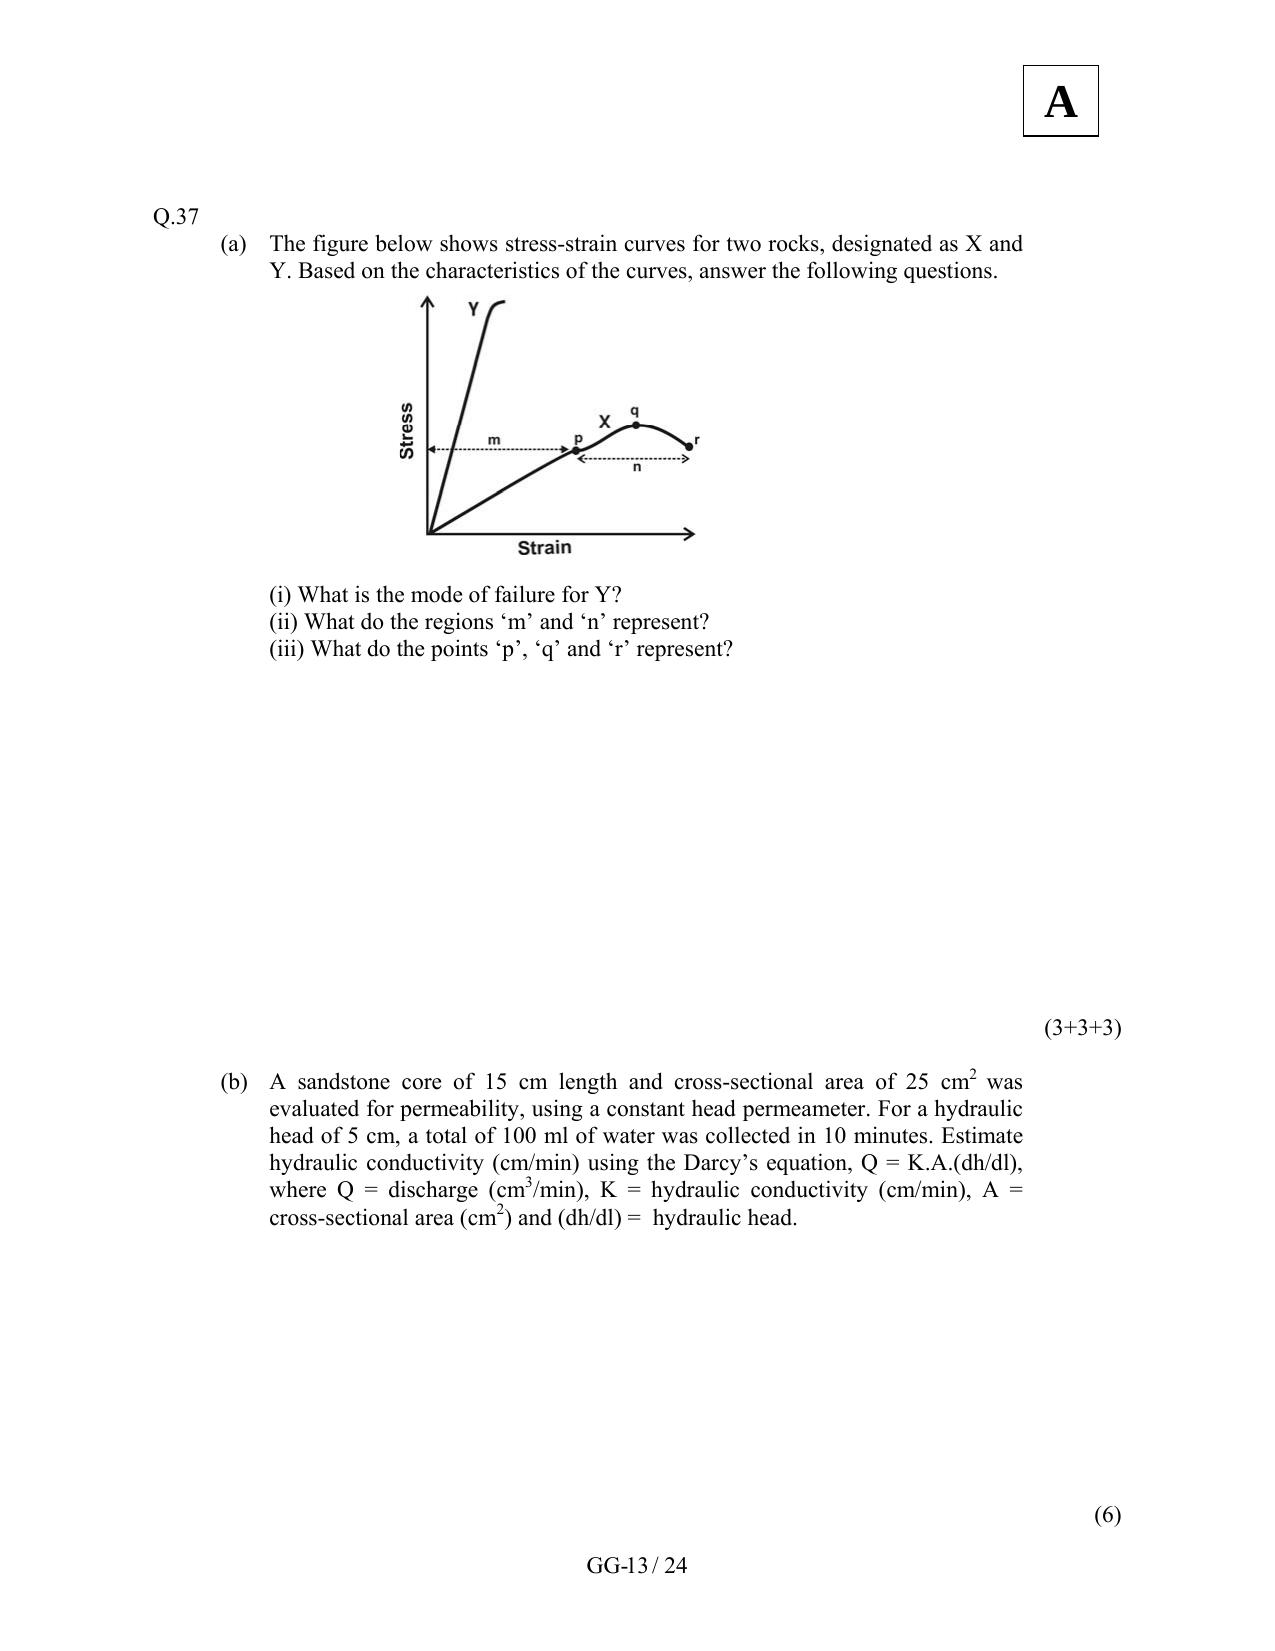 JAM 2012: GG Question Paper - Page 15